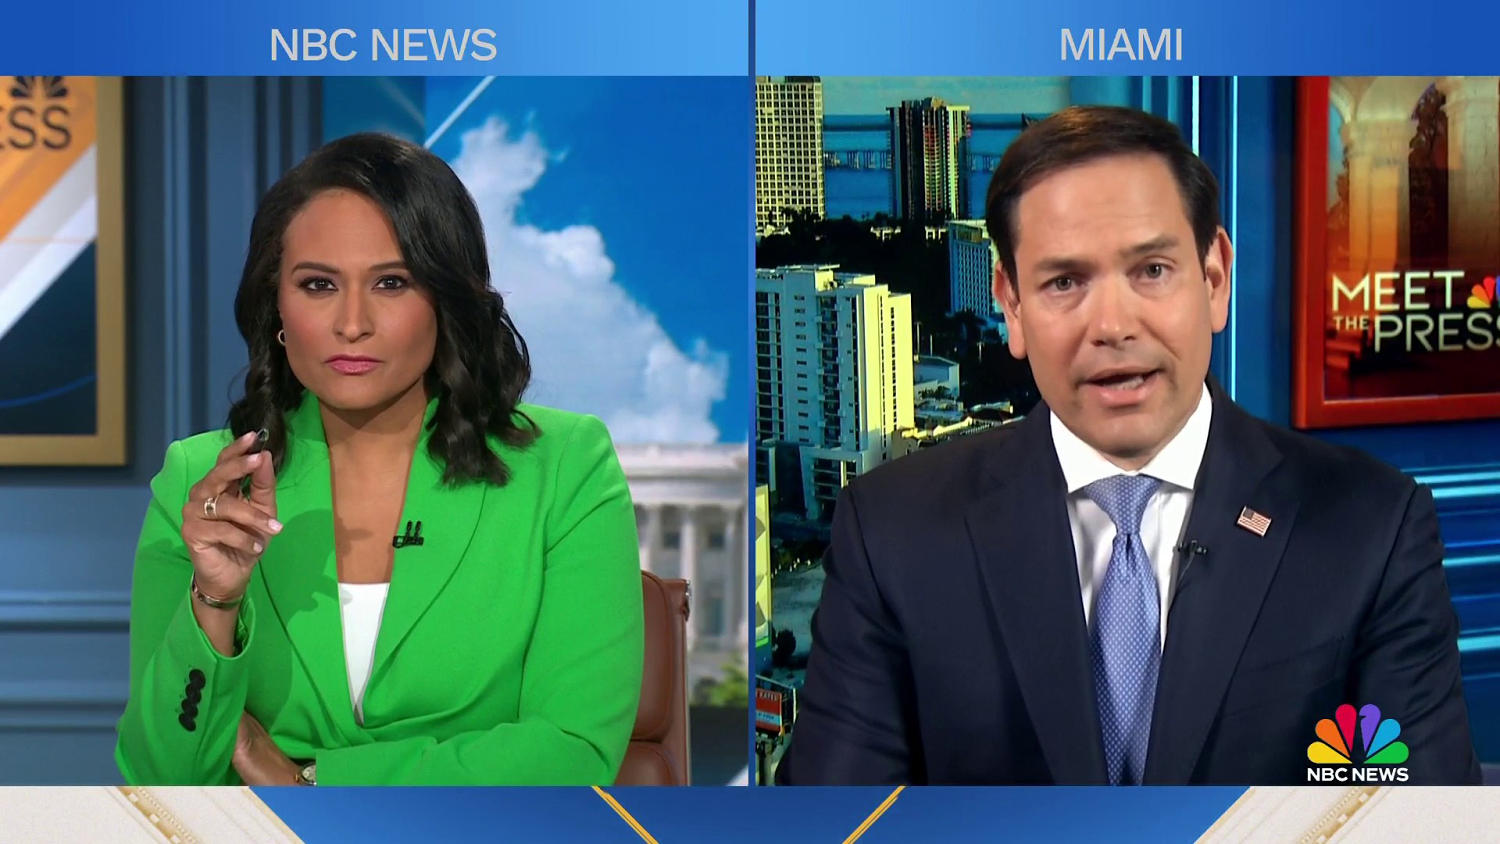 Sen. Marco Rubio indicates support for Florida abortion ban that Trump called a 'terrible mistake'